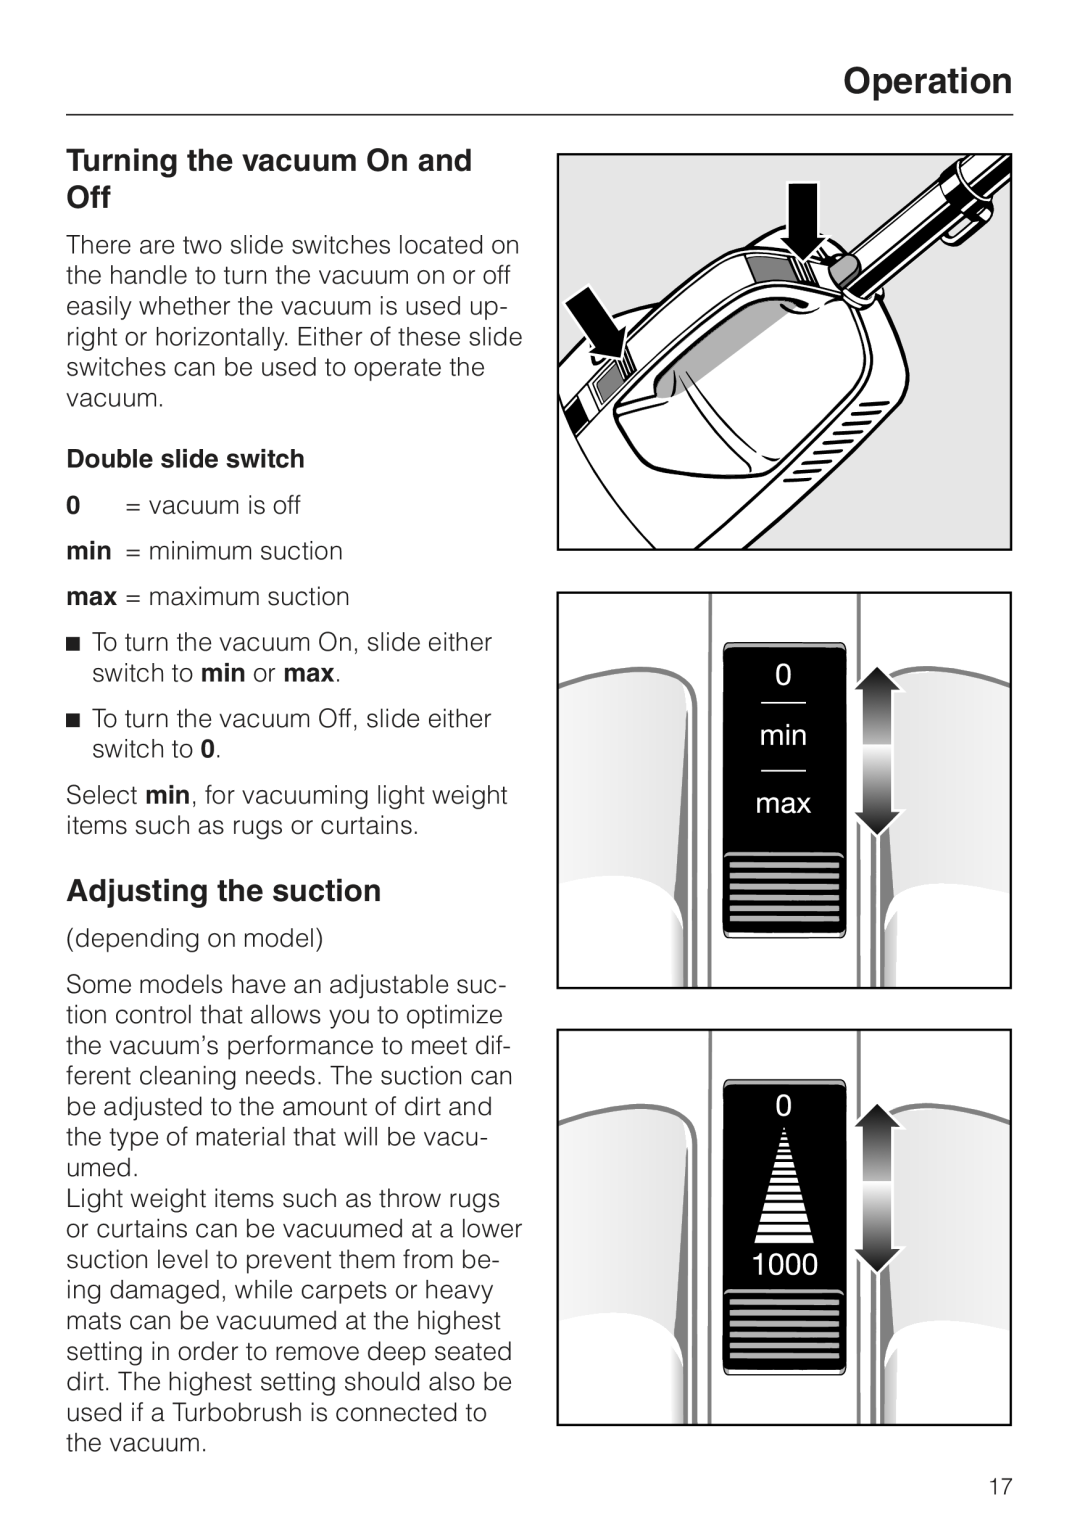 Miele S157 manual Turning the vacuum On and Off, Adjusting the suction, Operation, Double slide switch 0 = vacuum is off 